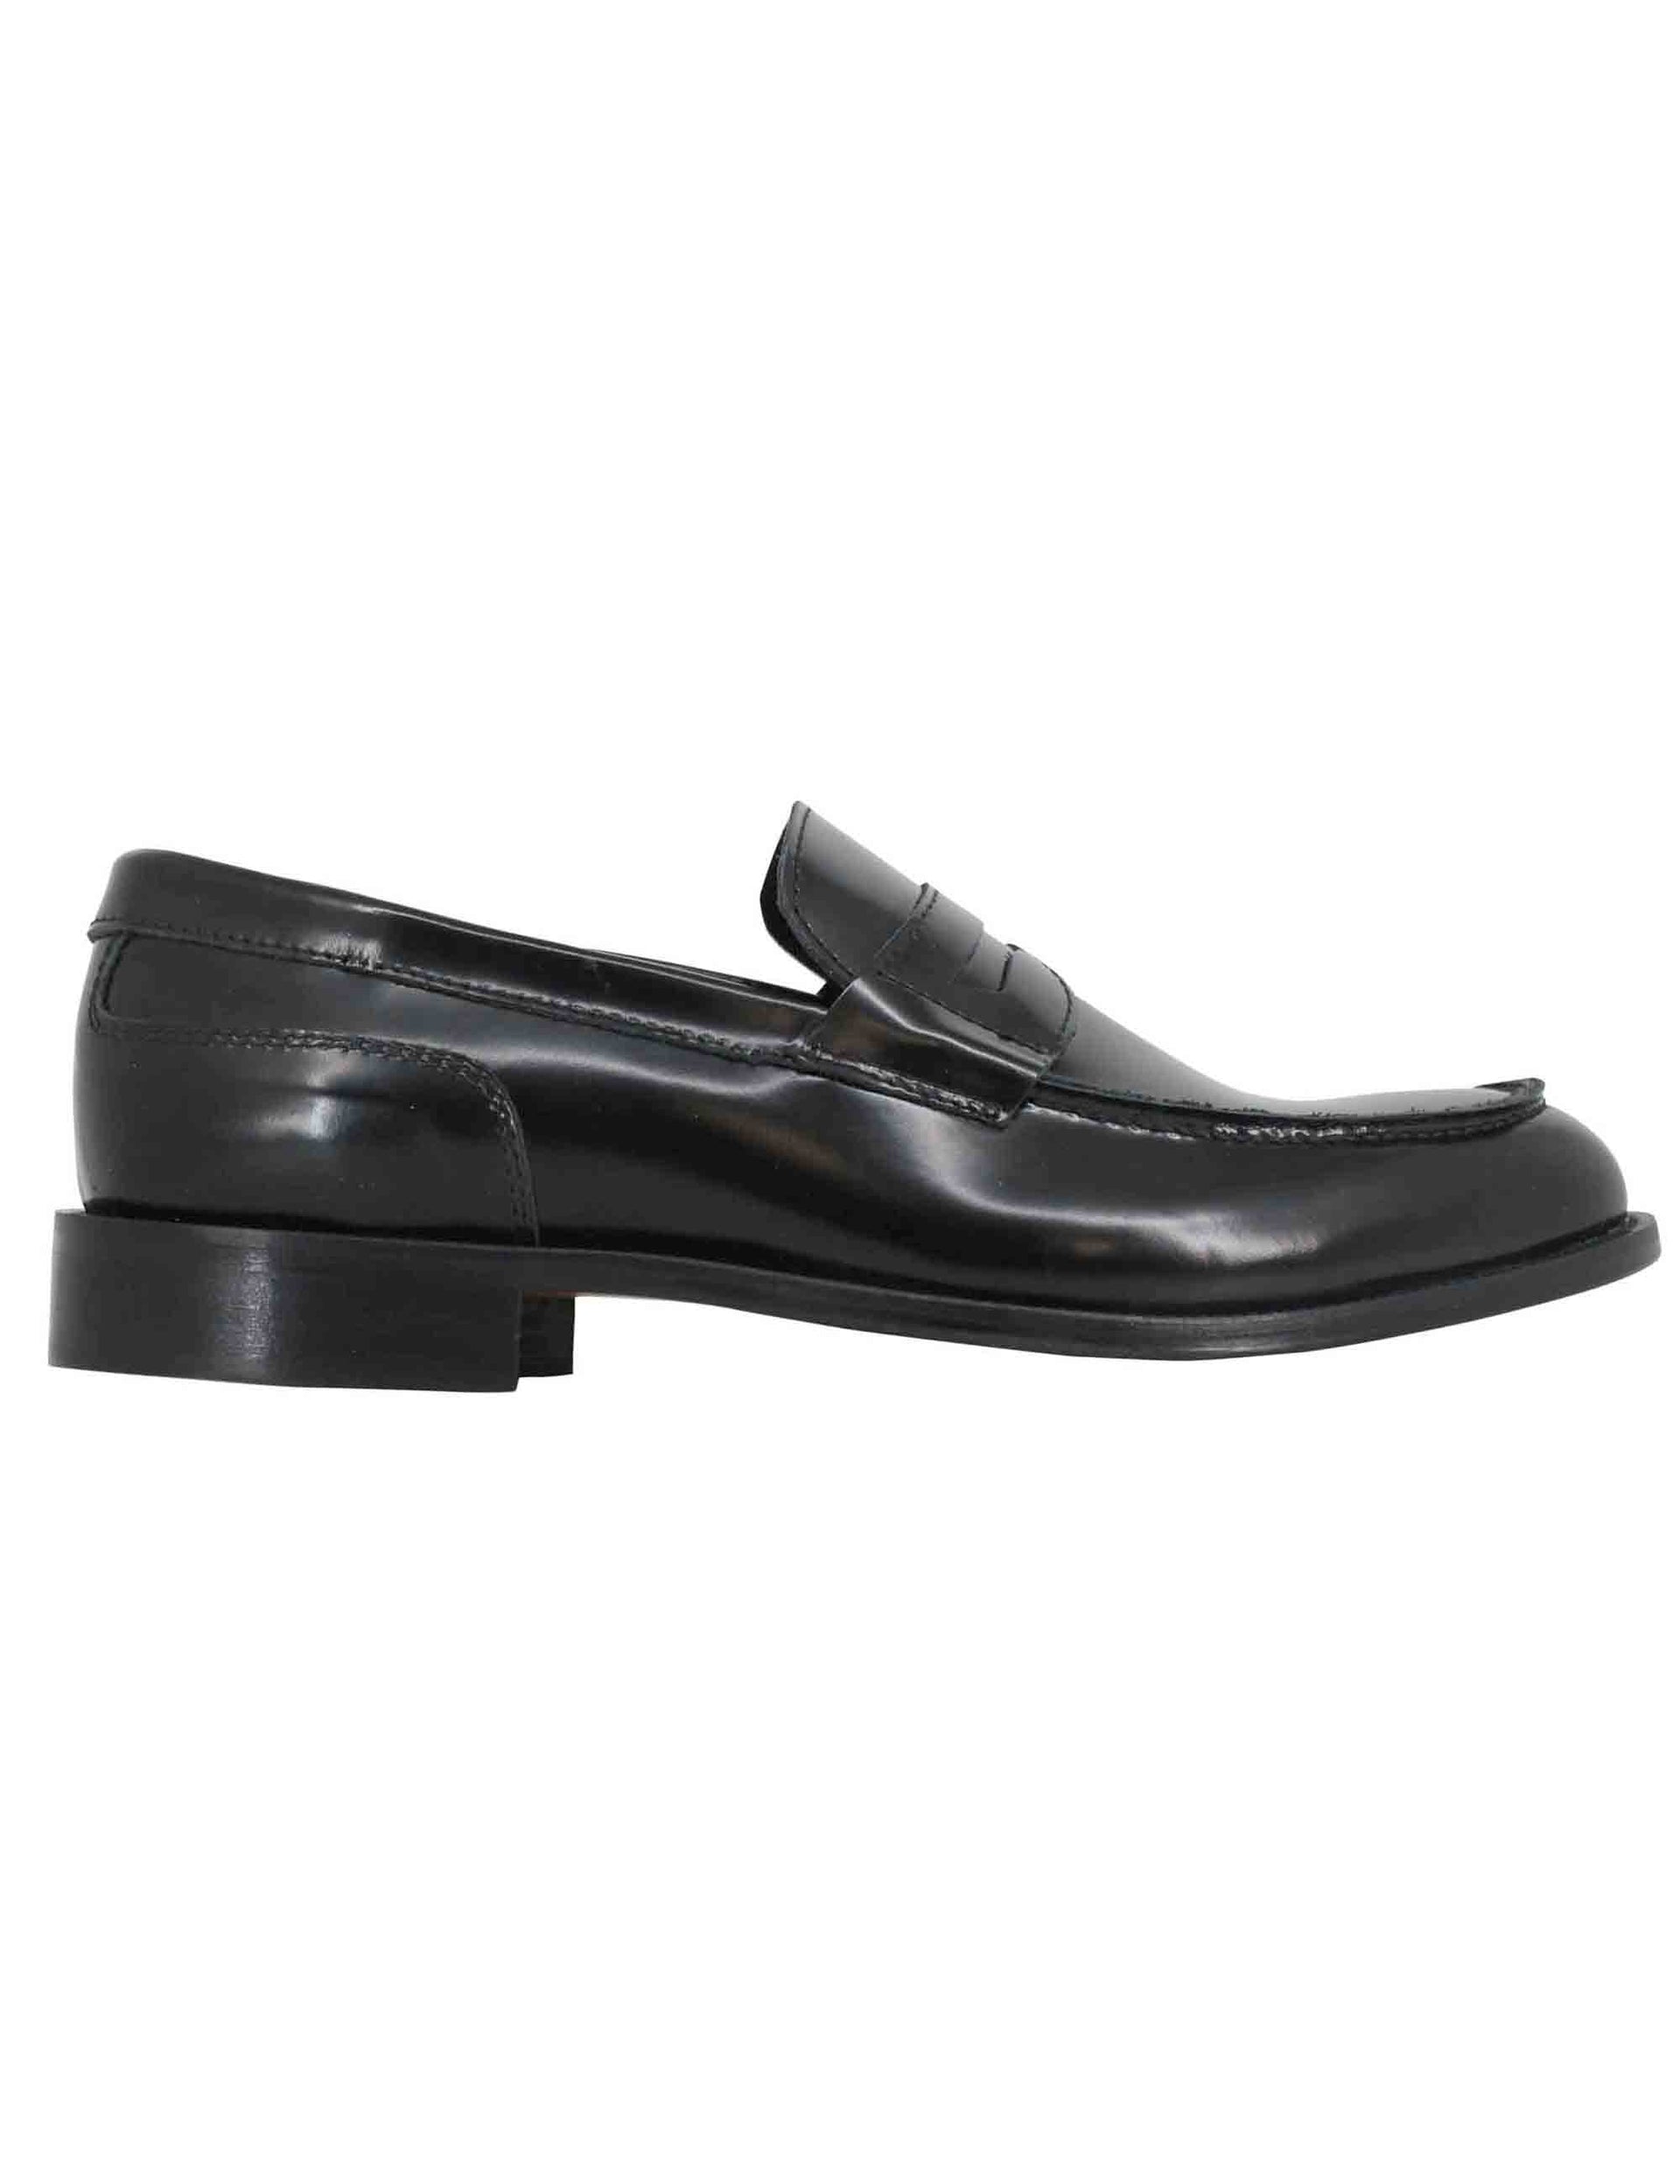 Men's moccasins in shiny black leather with stitched leather sole